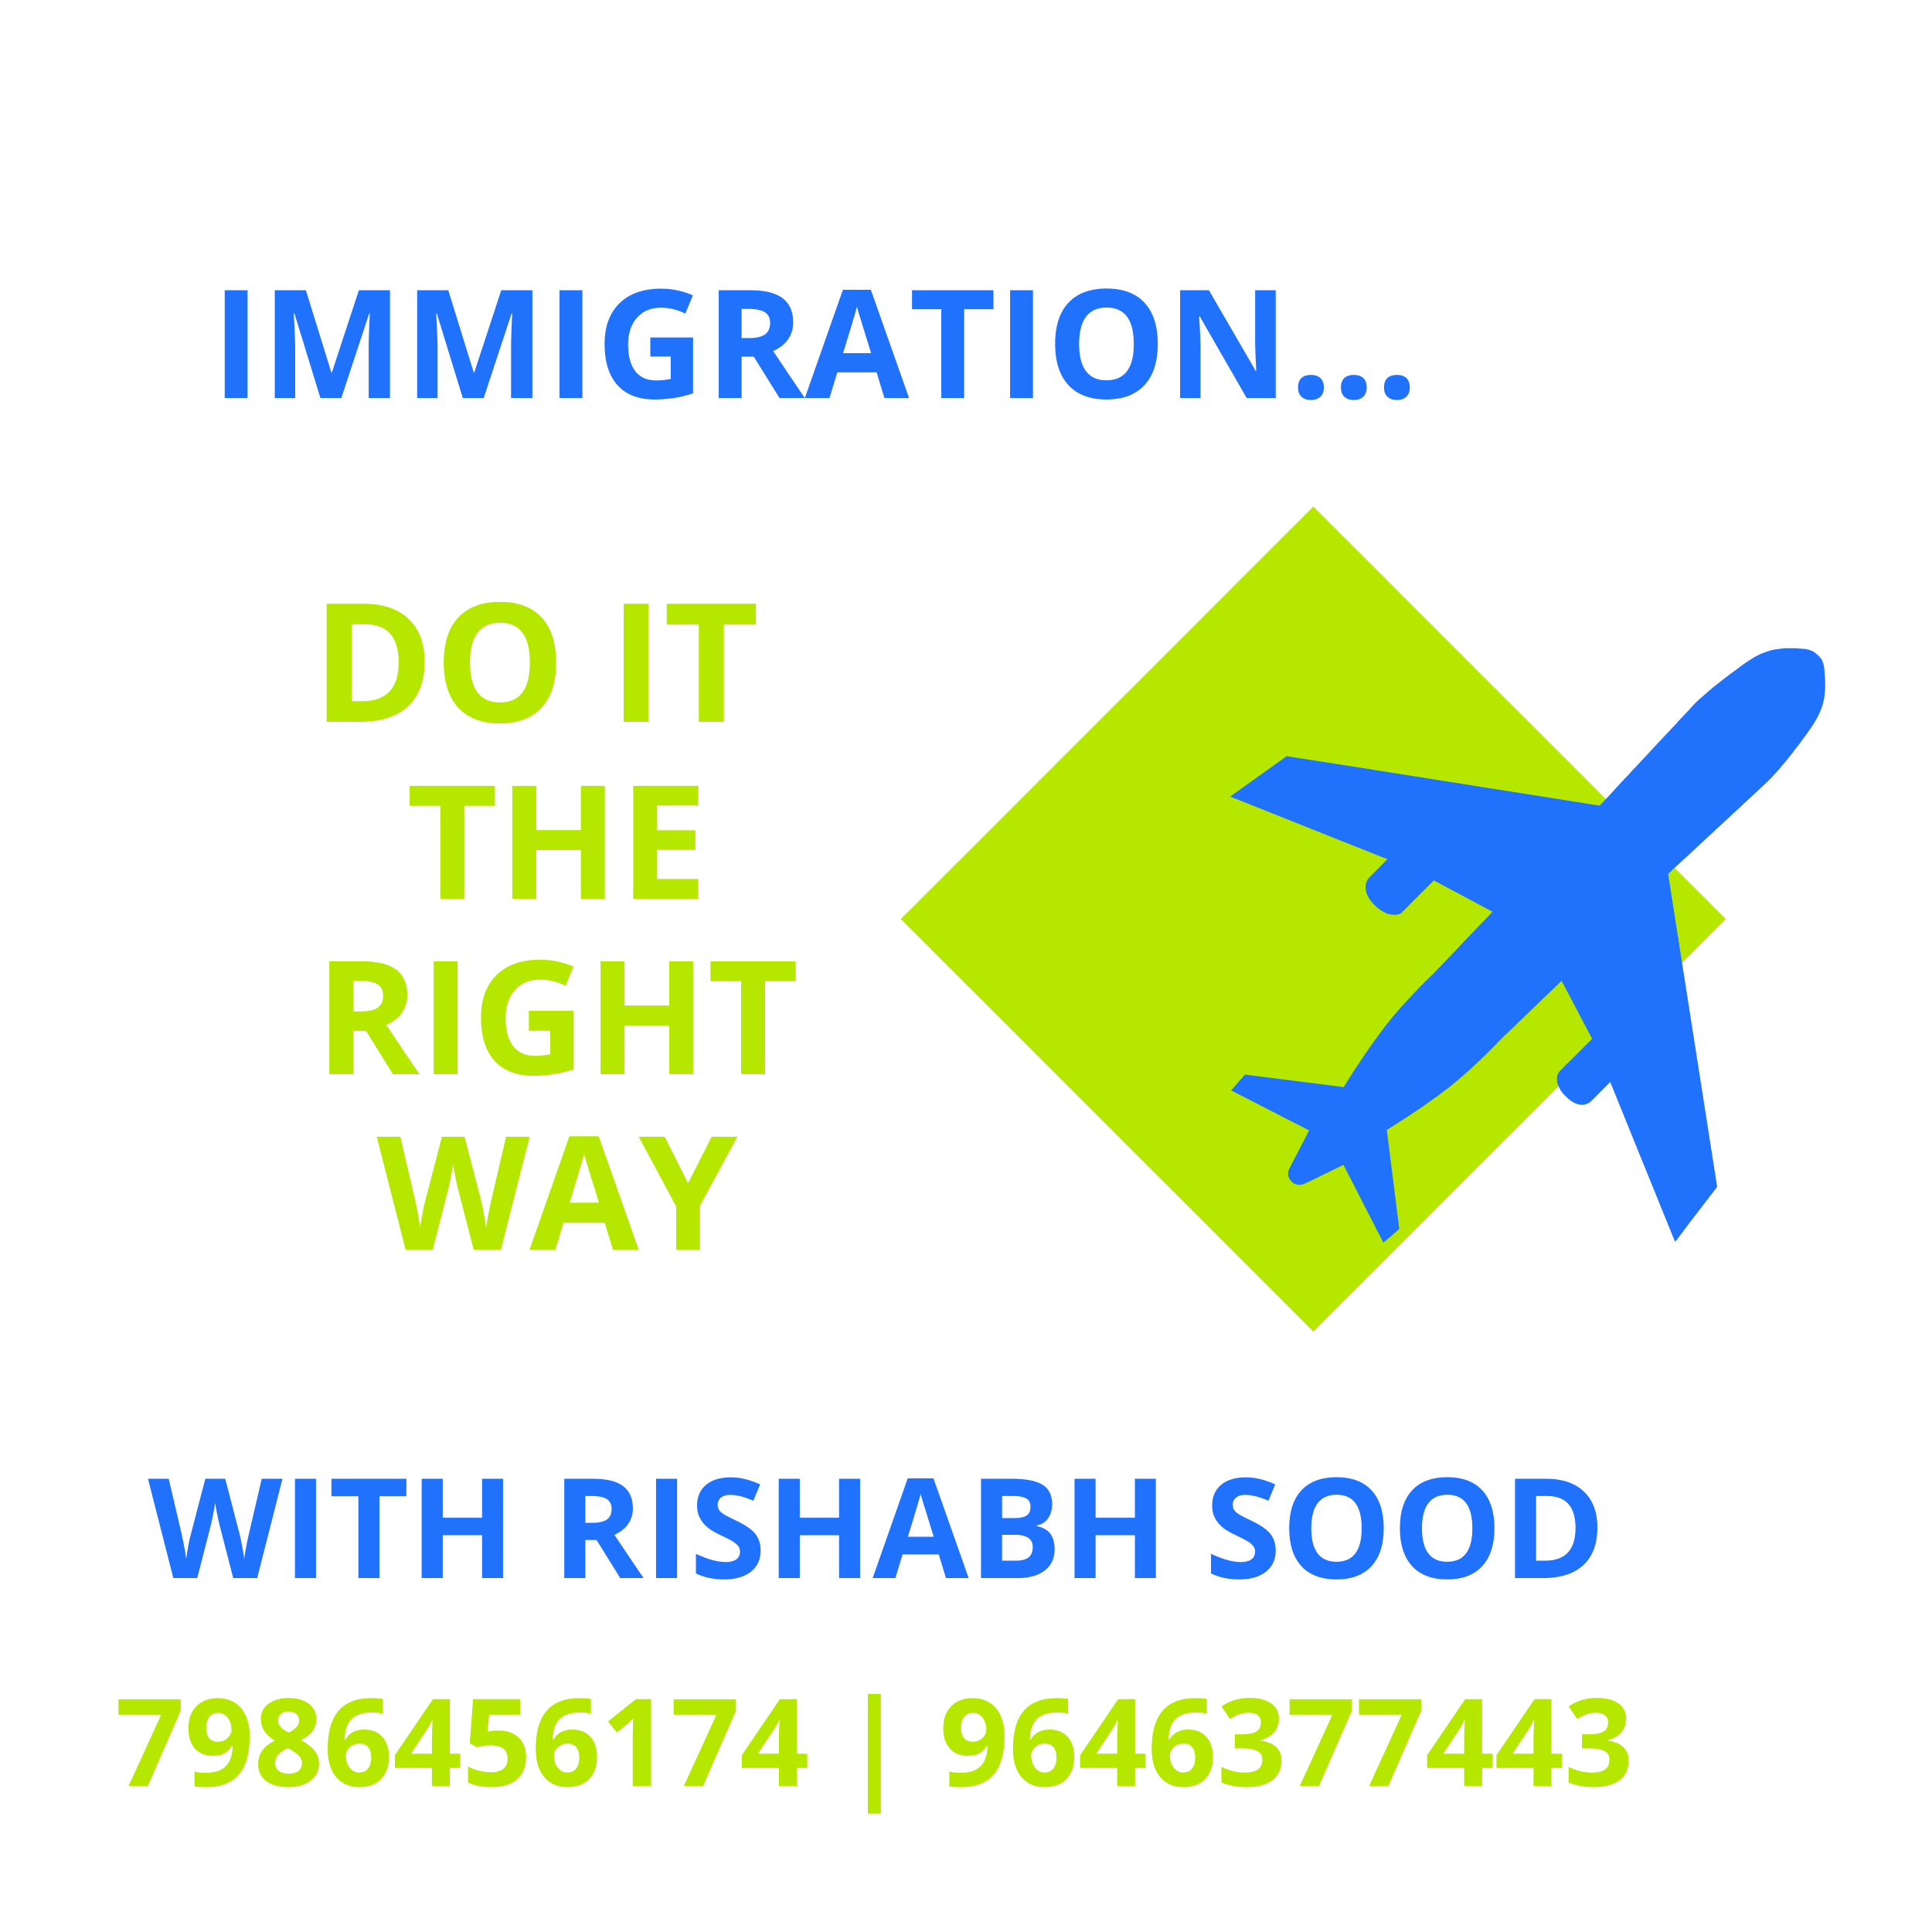 Real Reasons behind the BIG MOVE to CANADA-Transformers Immigration and Education Consultants | Transformers Immigration and Education Consultants | Canada PR Consultant in Panchkula, Best Immigration Consultant for Canada PR, Express entry, Immigrate to Canada, How to apply under express entry, How to apply Canada PR, Canada PR, Canada - GL102753